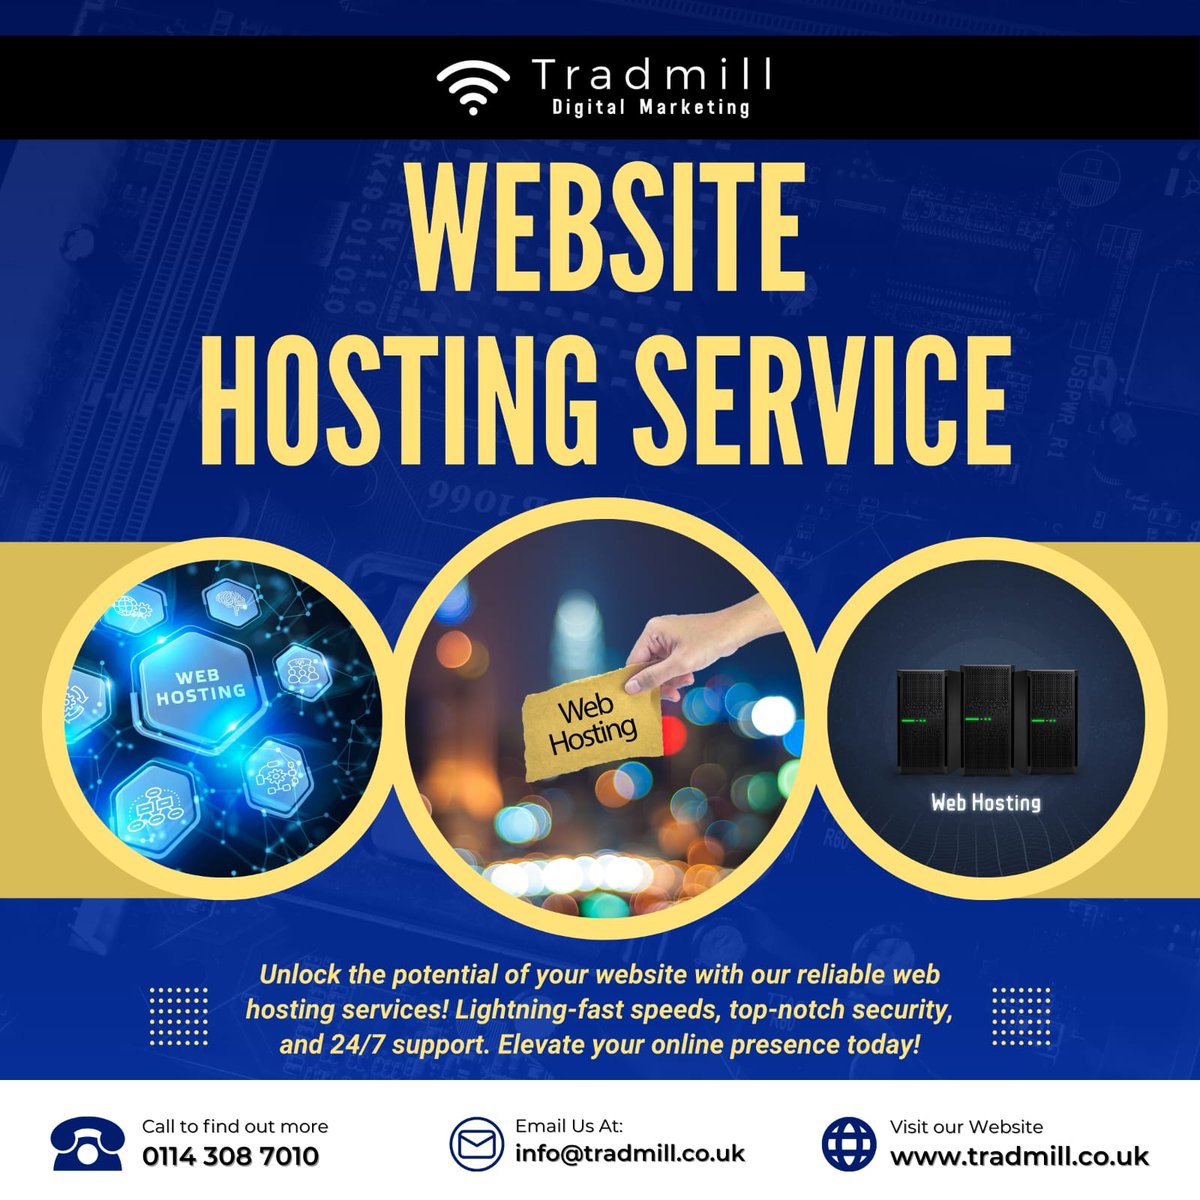 #Tradmill #Newwebsites #Sheffield #PayPerClick #FacebookAds #GoogleAds #InstrgramAds #PPC #digitalmarketing #marketing #socialmediamarketing #socialmedia #digitalmarketingagency #Franchisewithus #franchising #onlinebusiness #SouthYorkshire bit.ly/3OSvPba